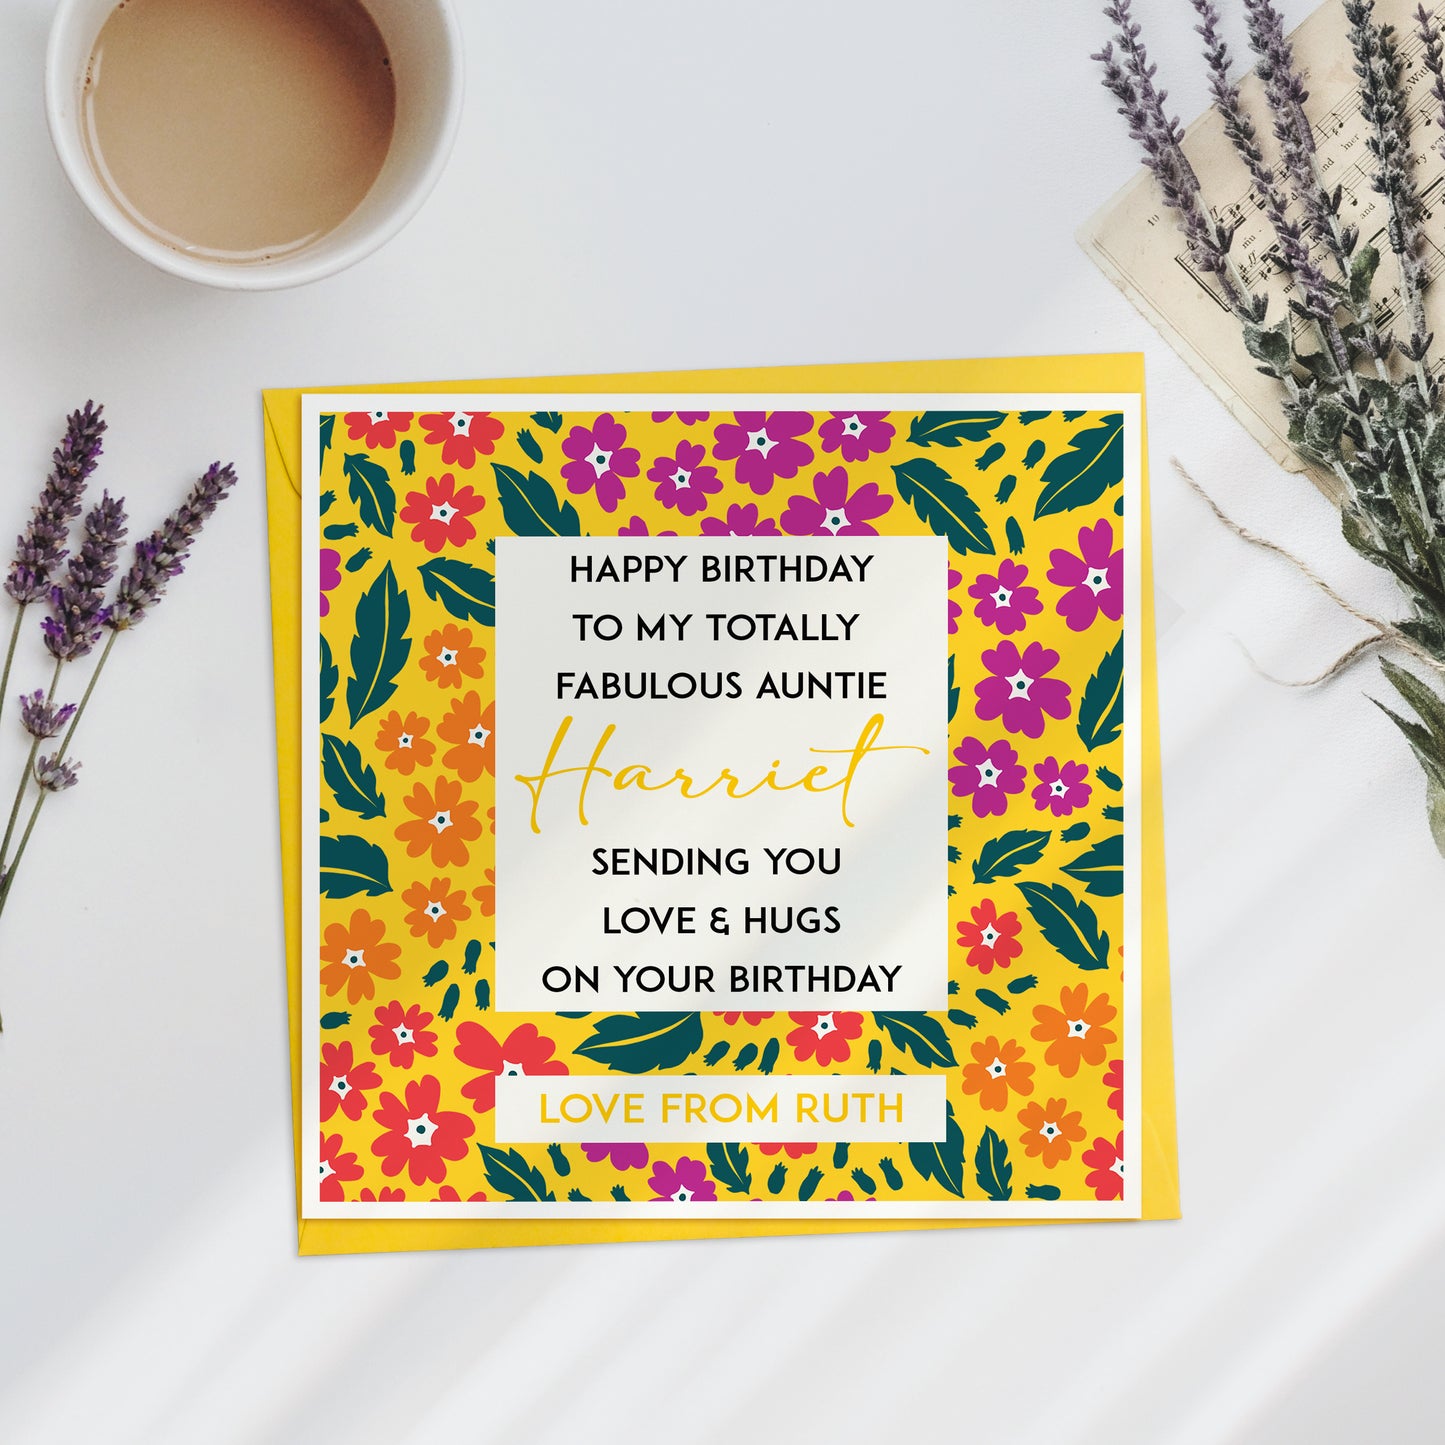 Totally Fabulous Aunt Birthday Card